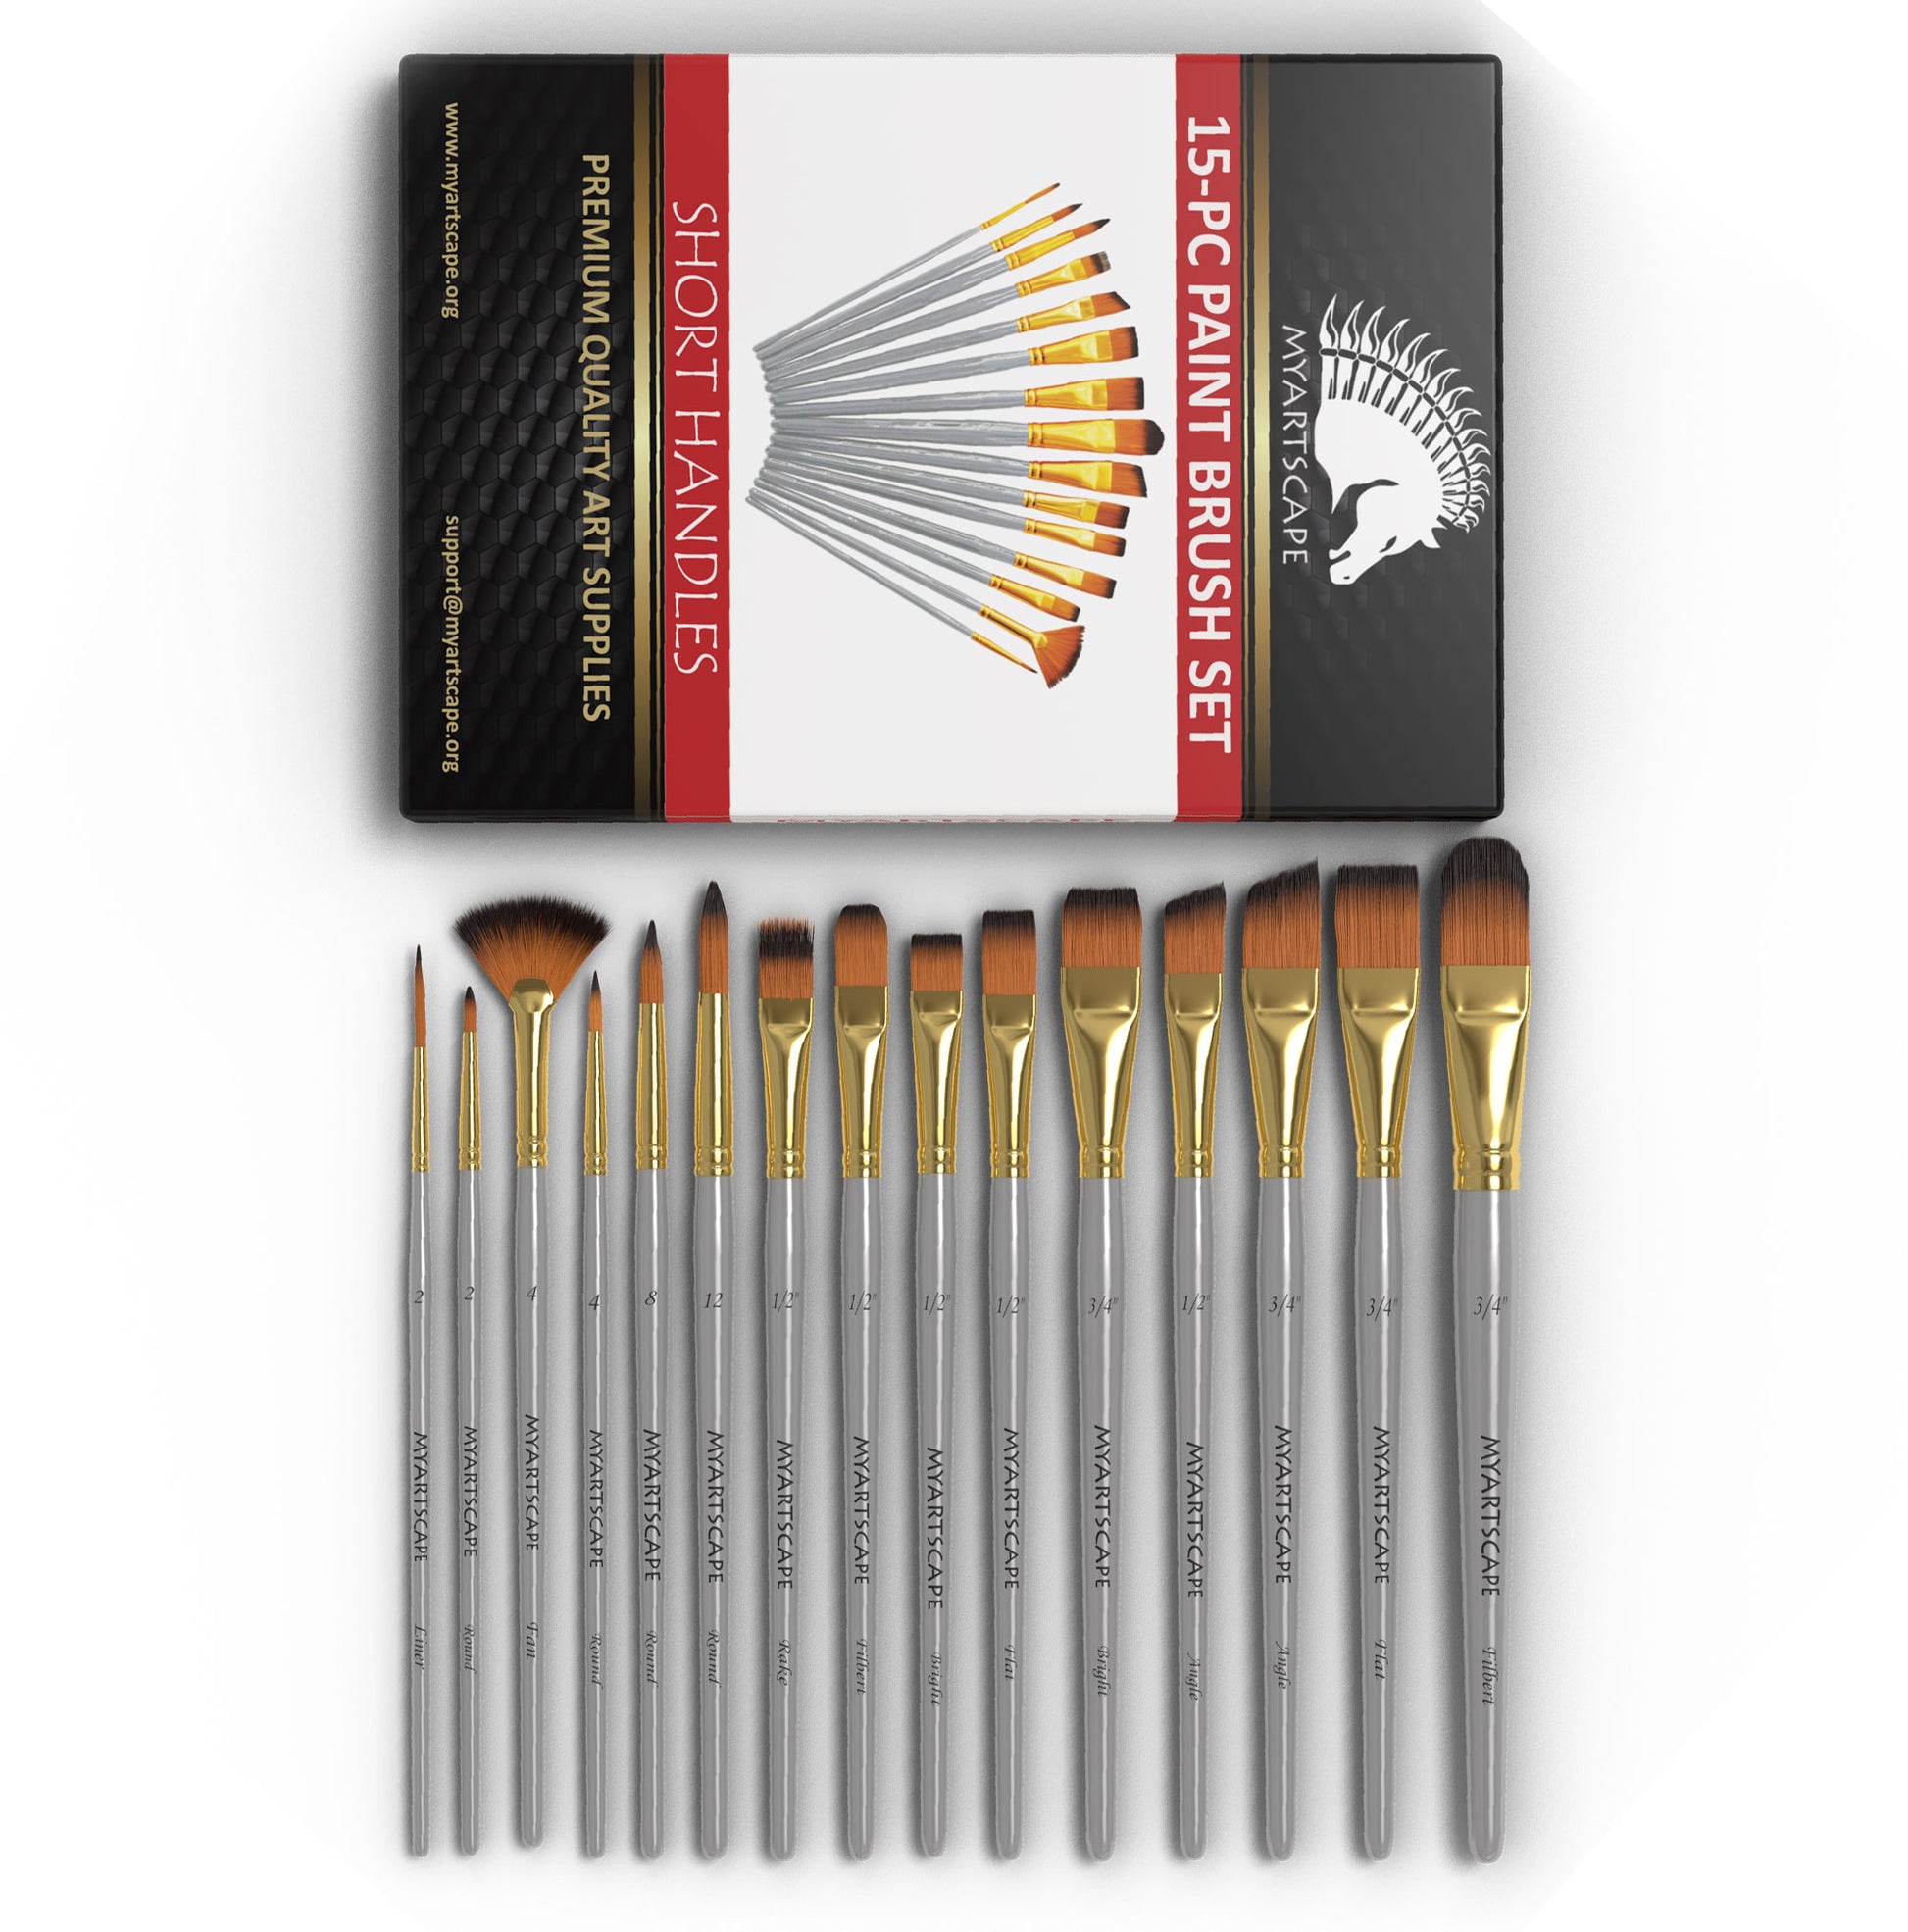 25ct Short Handle Value Brushes - Paint Brush by Shape - Art Supplies & Painting